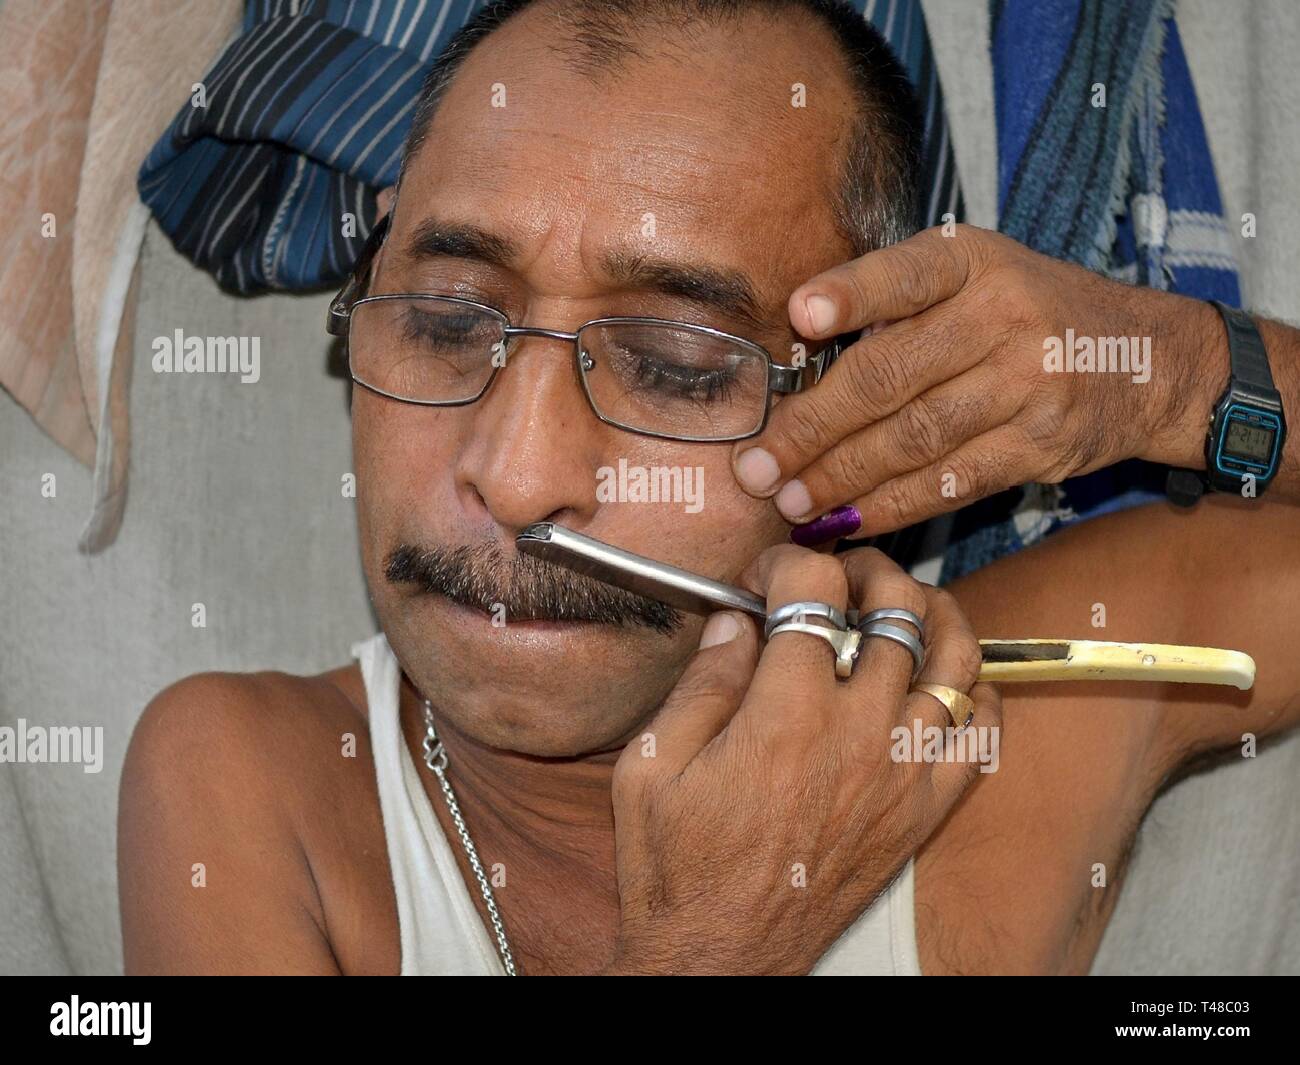 Funny Indian curbside barber with puffed up cheeks trims his menjou moustache with a straight razor. Stock Photo